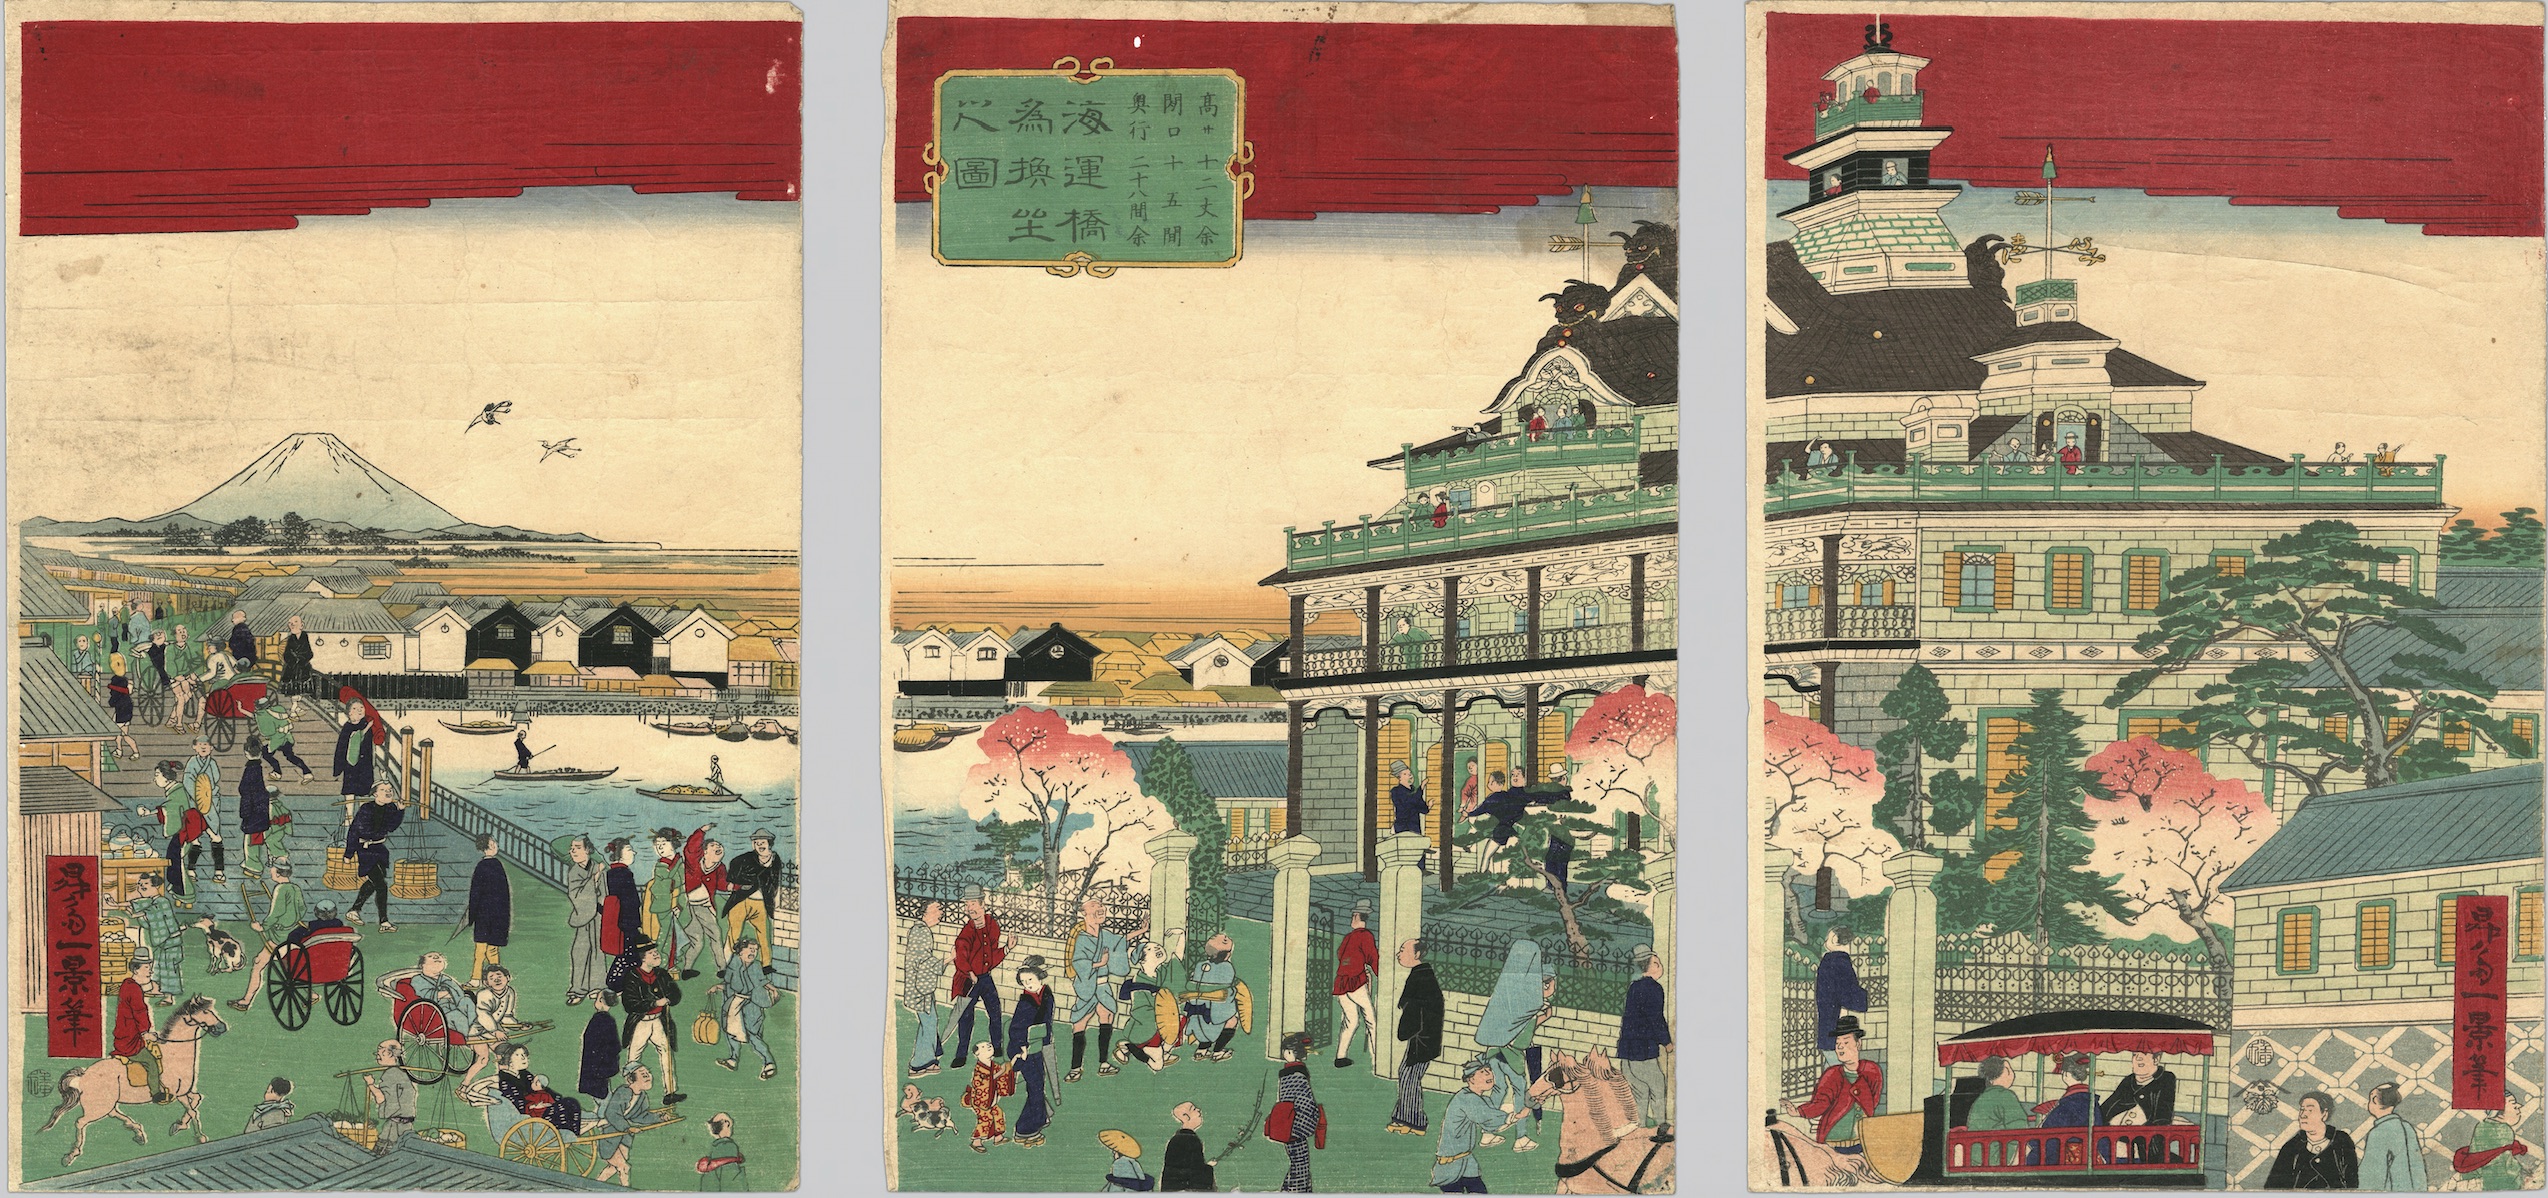 A triptych illustration depicting many pedestrians and people in carriages approaching a mansion. Mount Fuji appears to be in the far background.